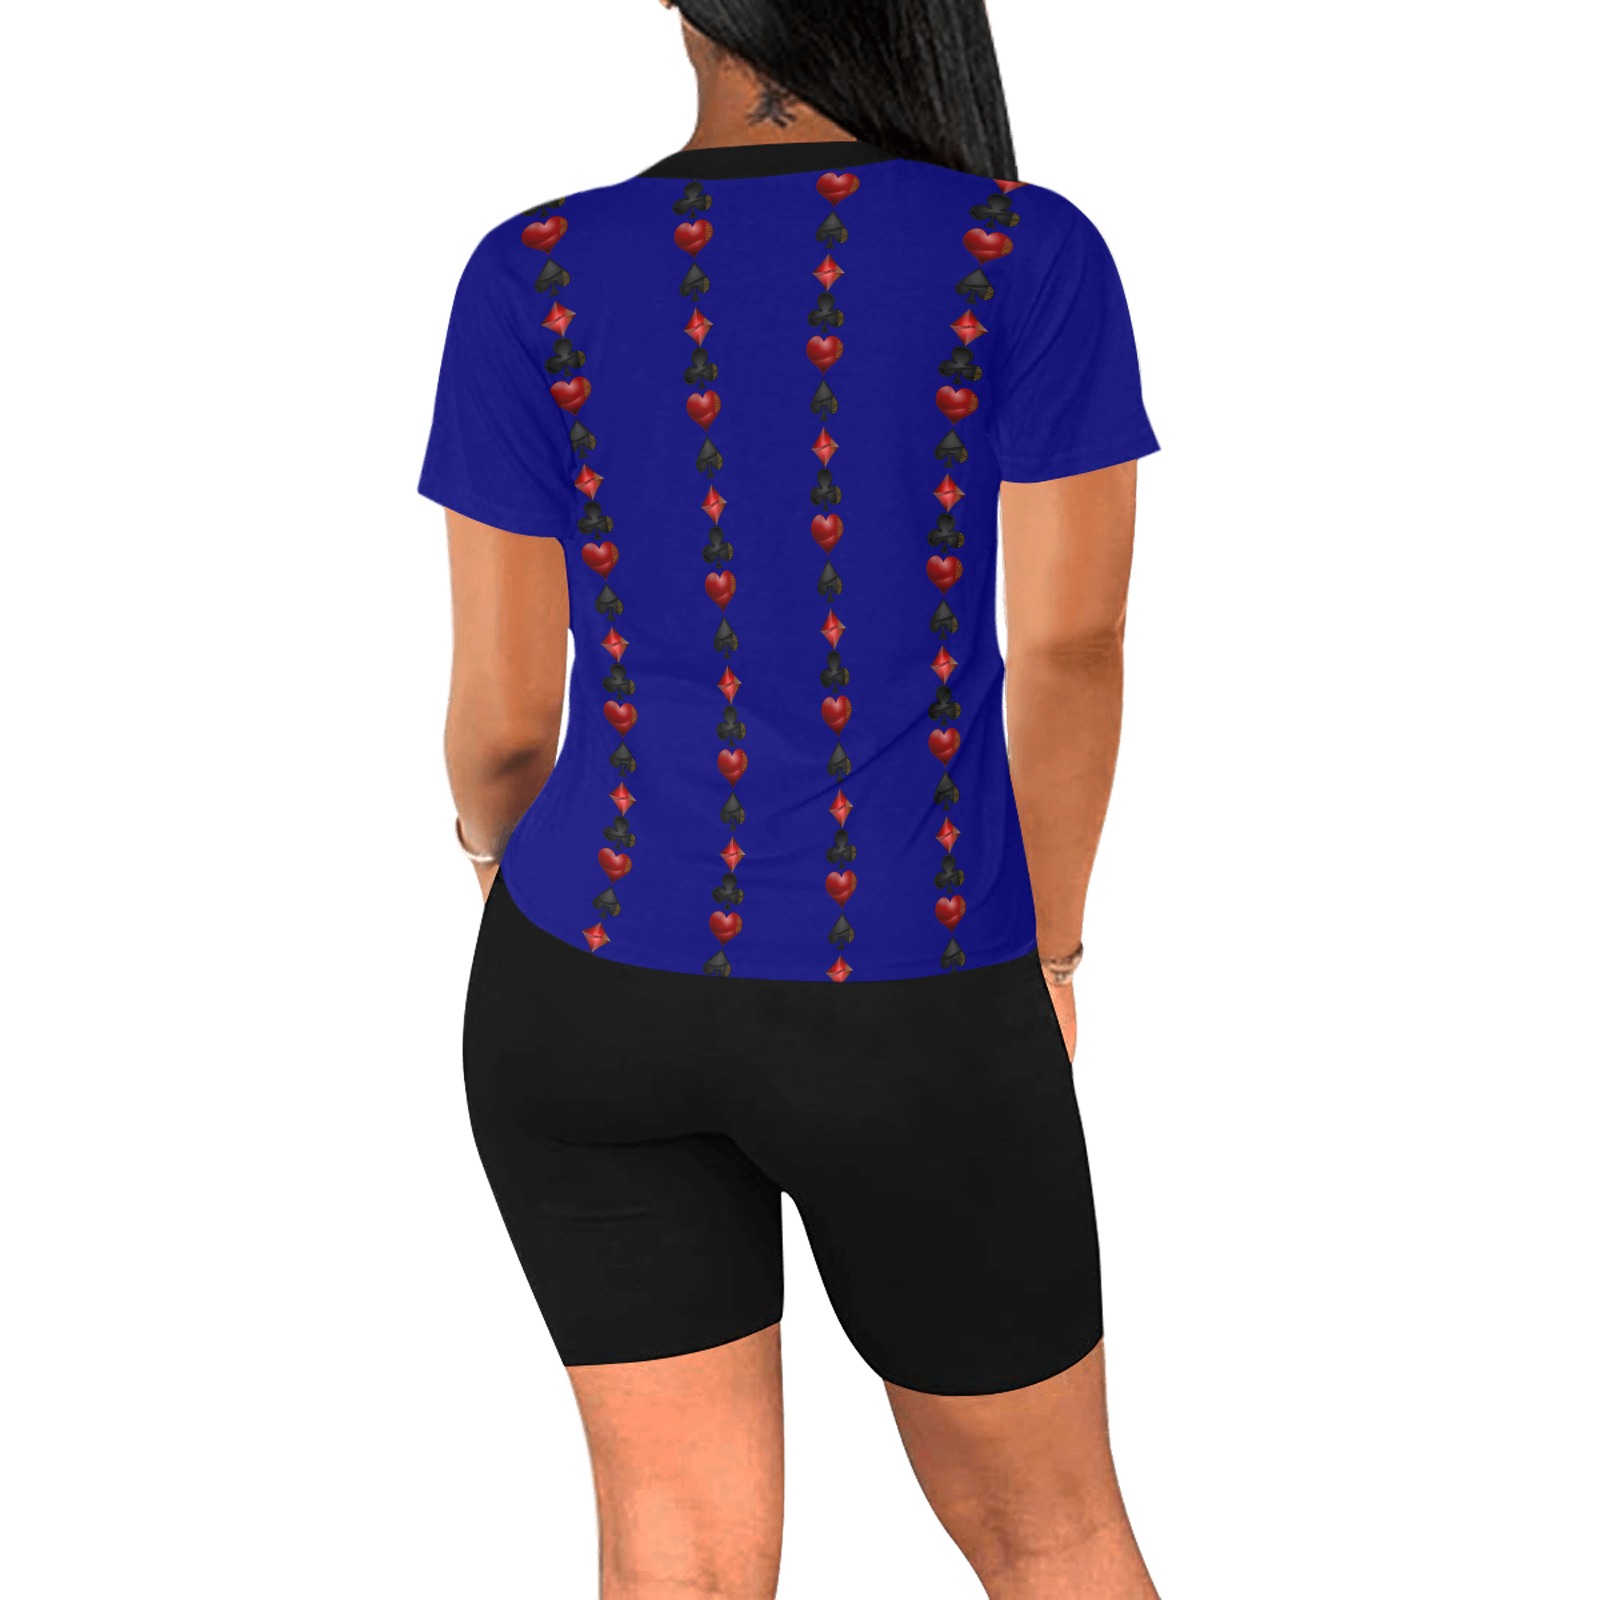 Black and Red Casino Card Shapes on Blue Women's Short Yoga Set